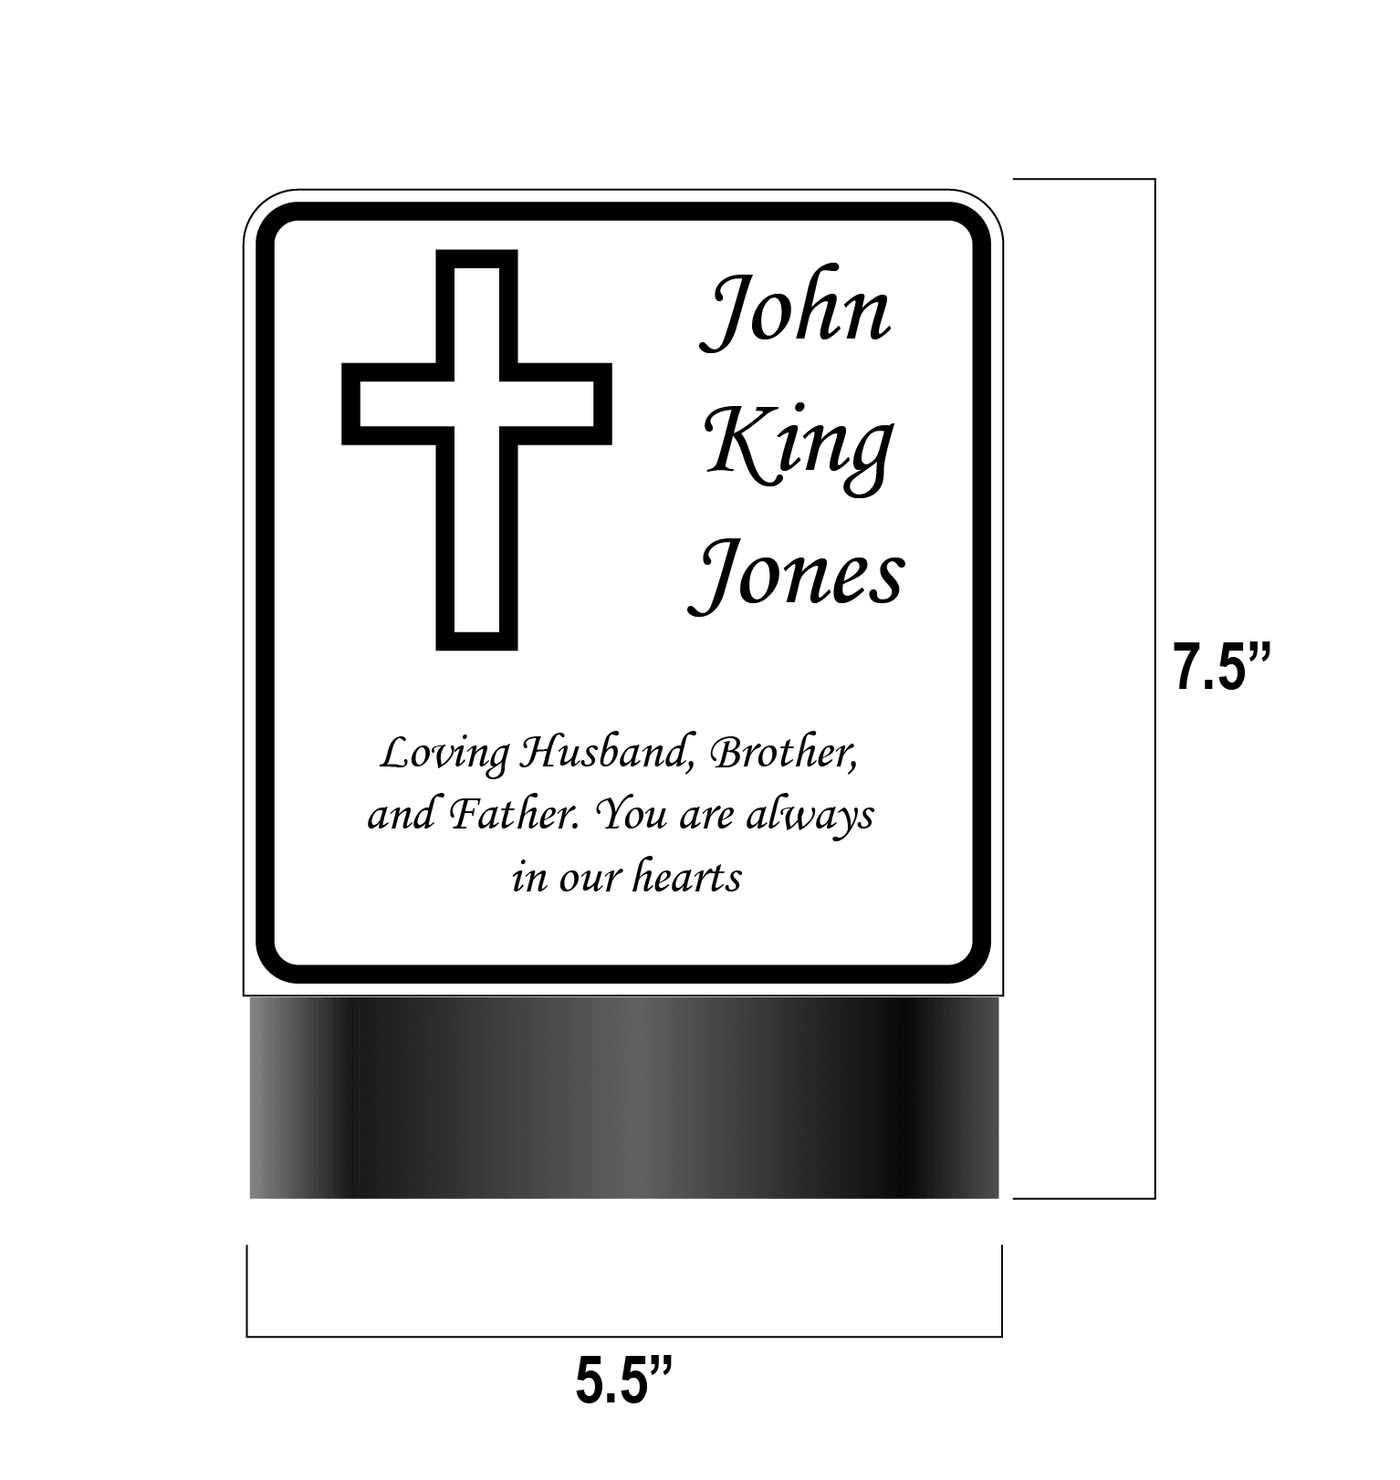 Personalized LED Cross Grave Marker - Outdoor light - Good to use as - in Gardens - memorials and more - Bereavement Sympathy gift - Cemetery marker